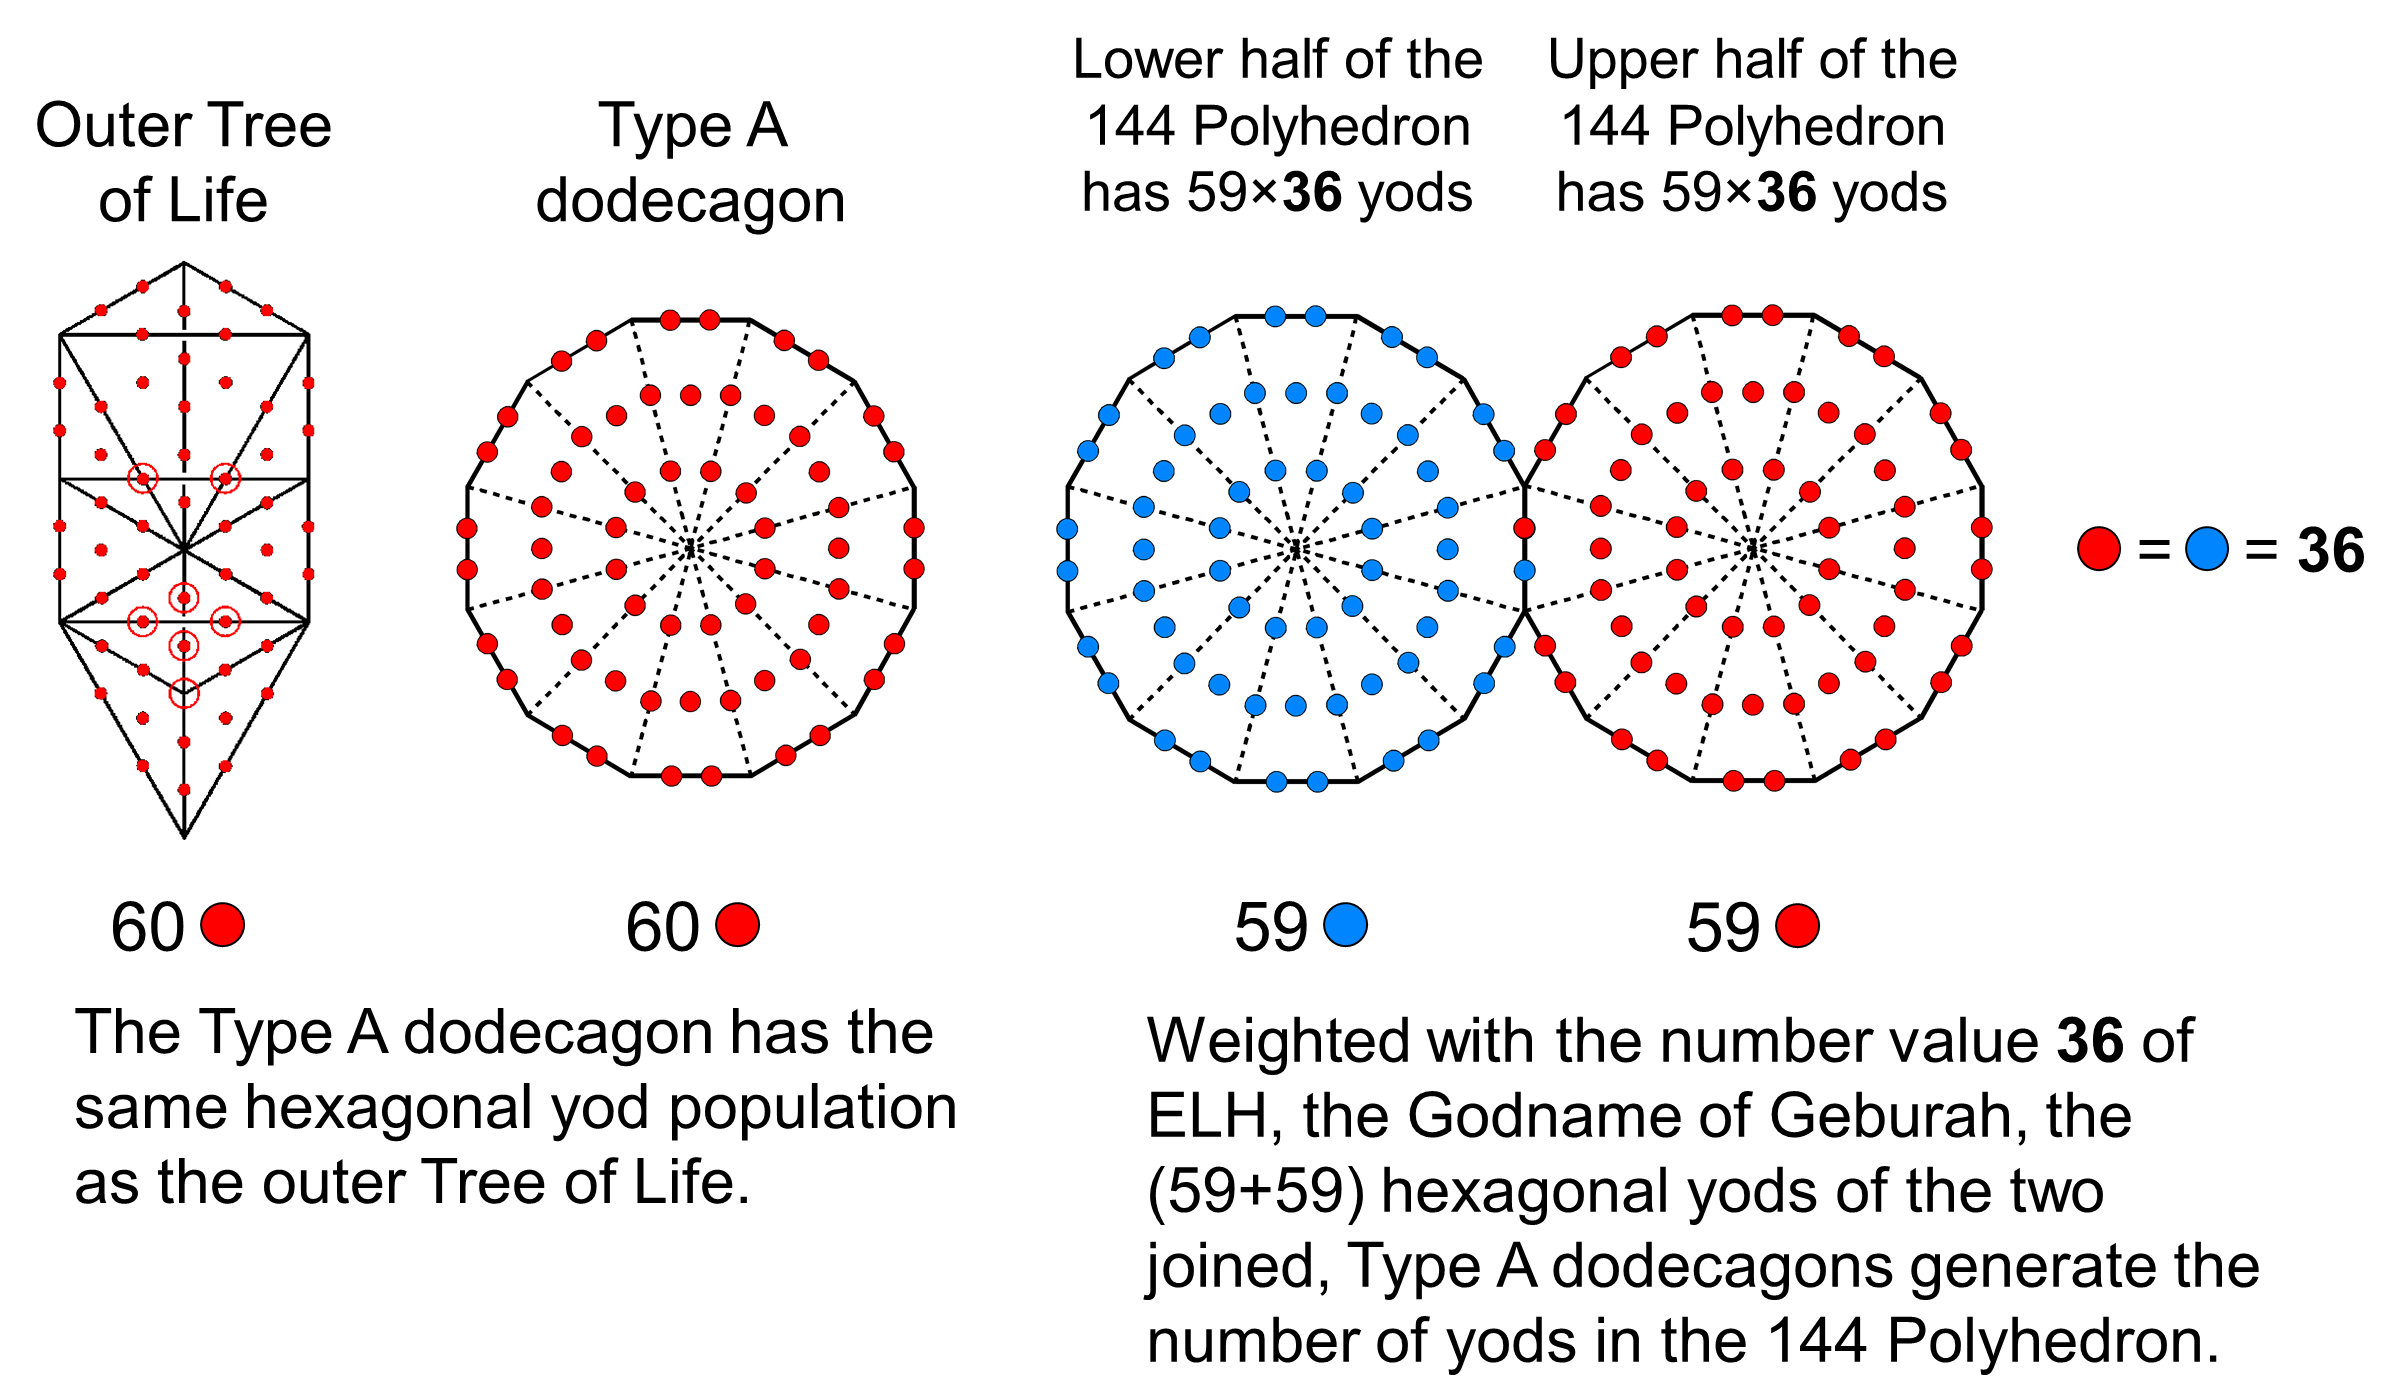 Dodecagonal representation of yod population in 144 Polyhedron